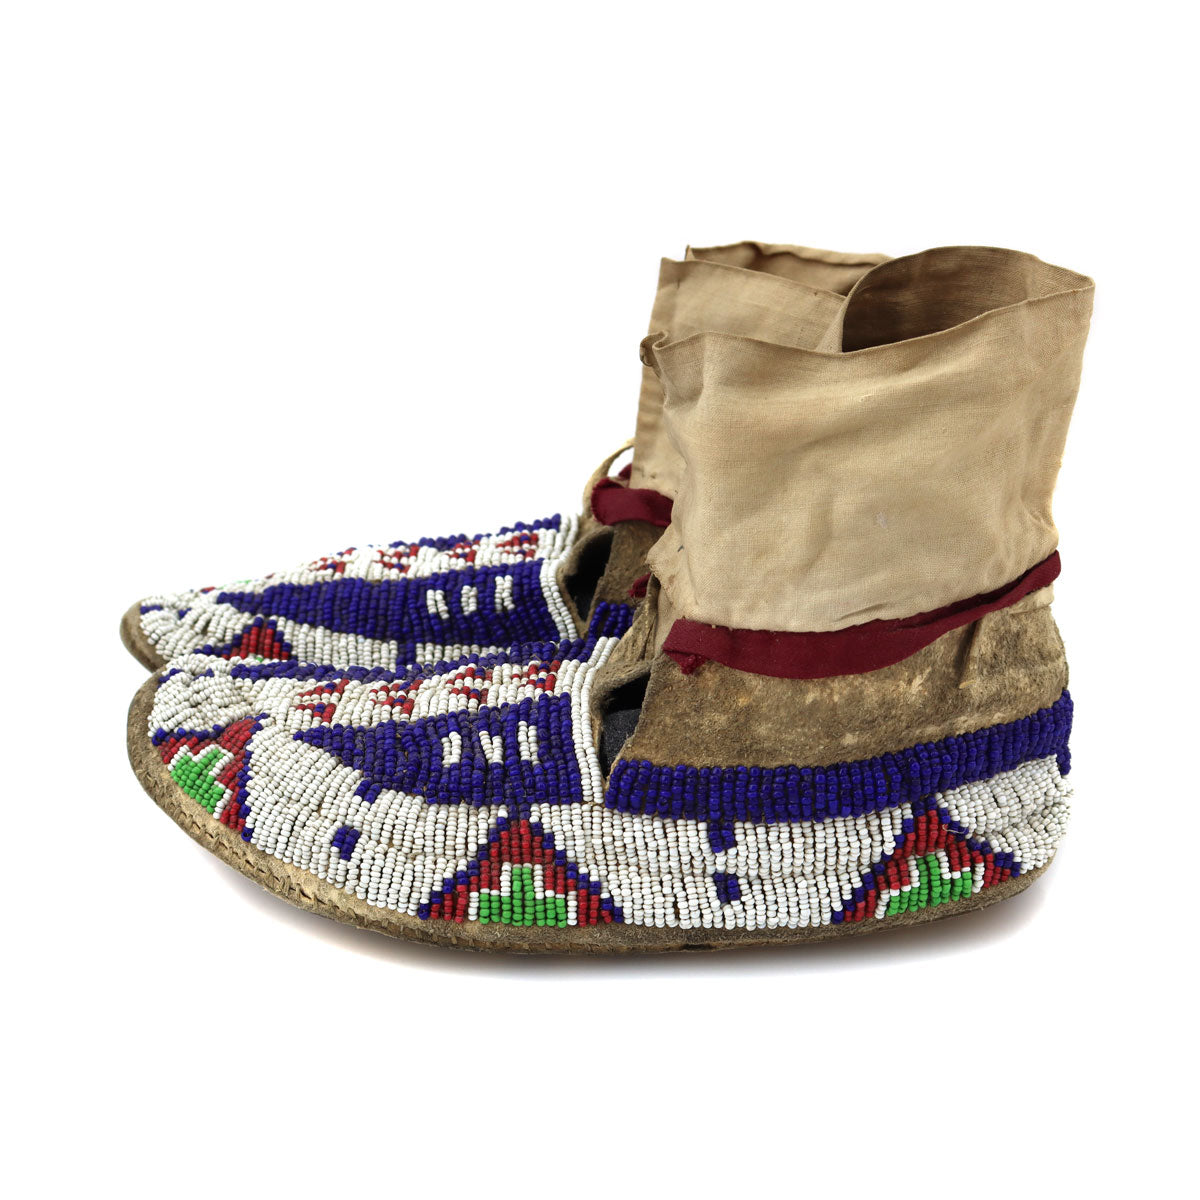 Sioux Beaded Leather Moccasins c. 1890s, 2.75" x 8.5" x 3.25" (DW91963-1021-019)2